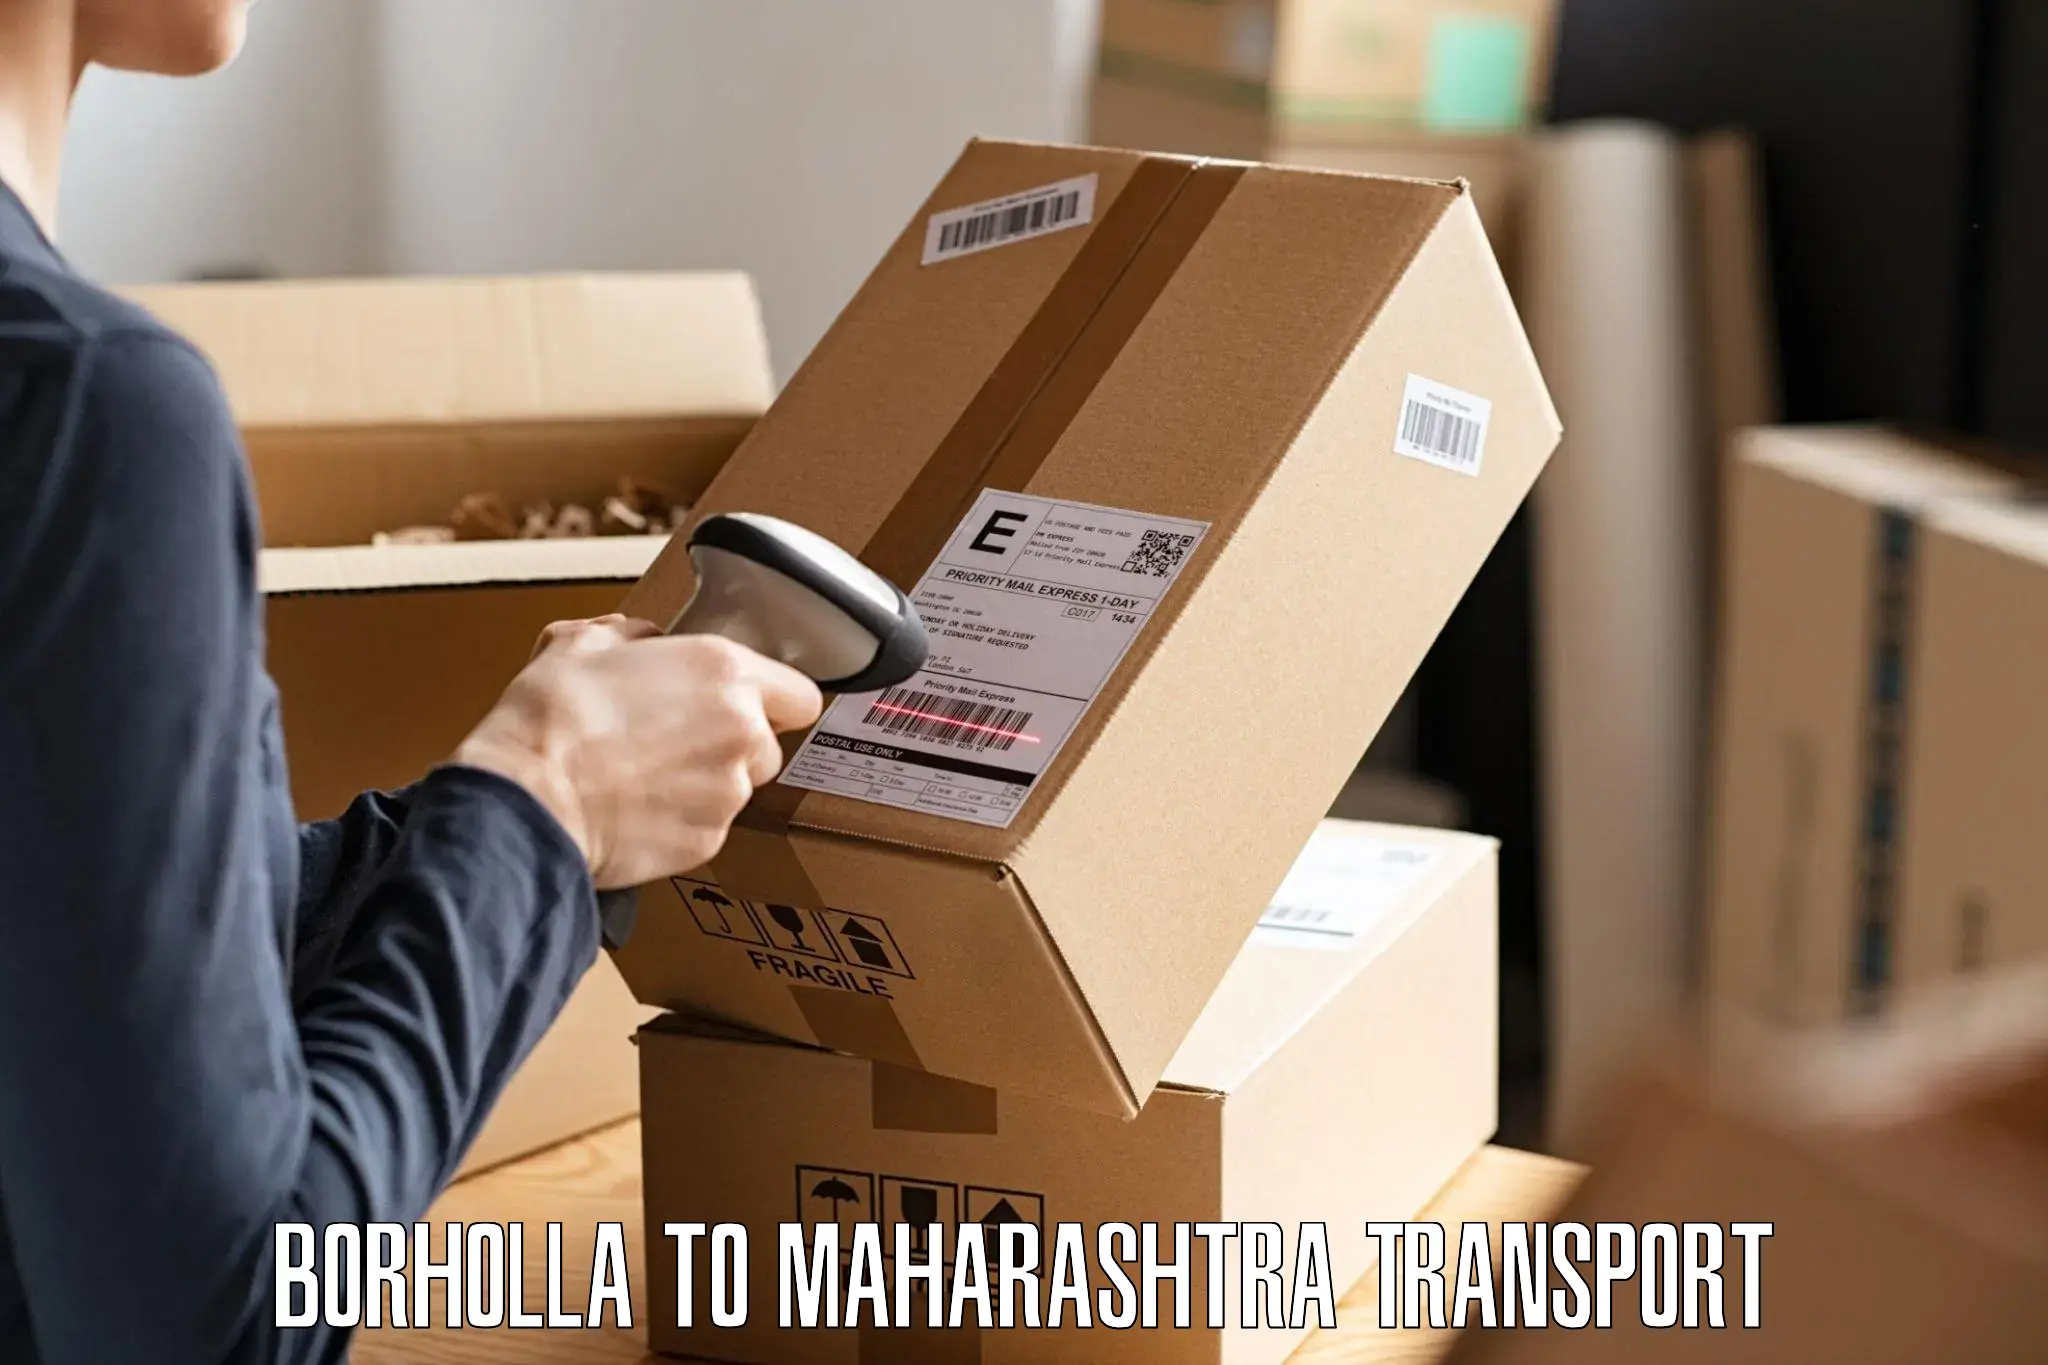 Truck transport companies in India Borholla to Sindhudurg